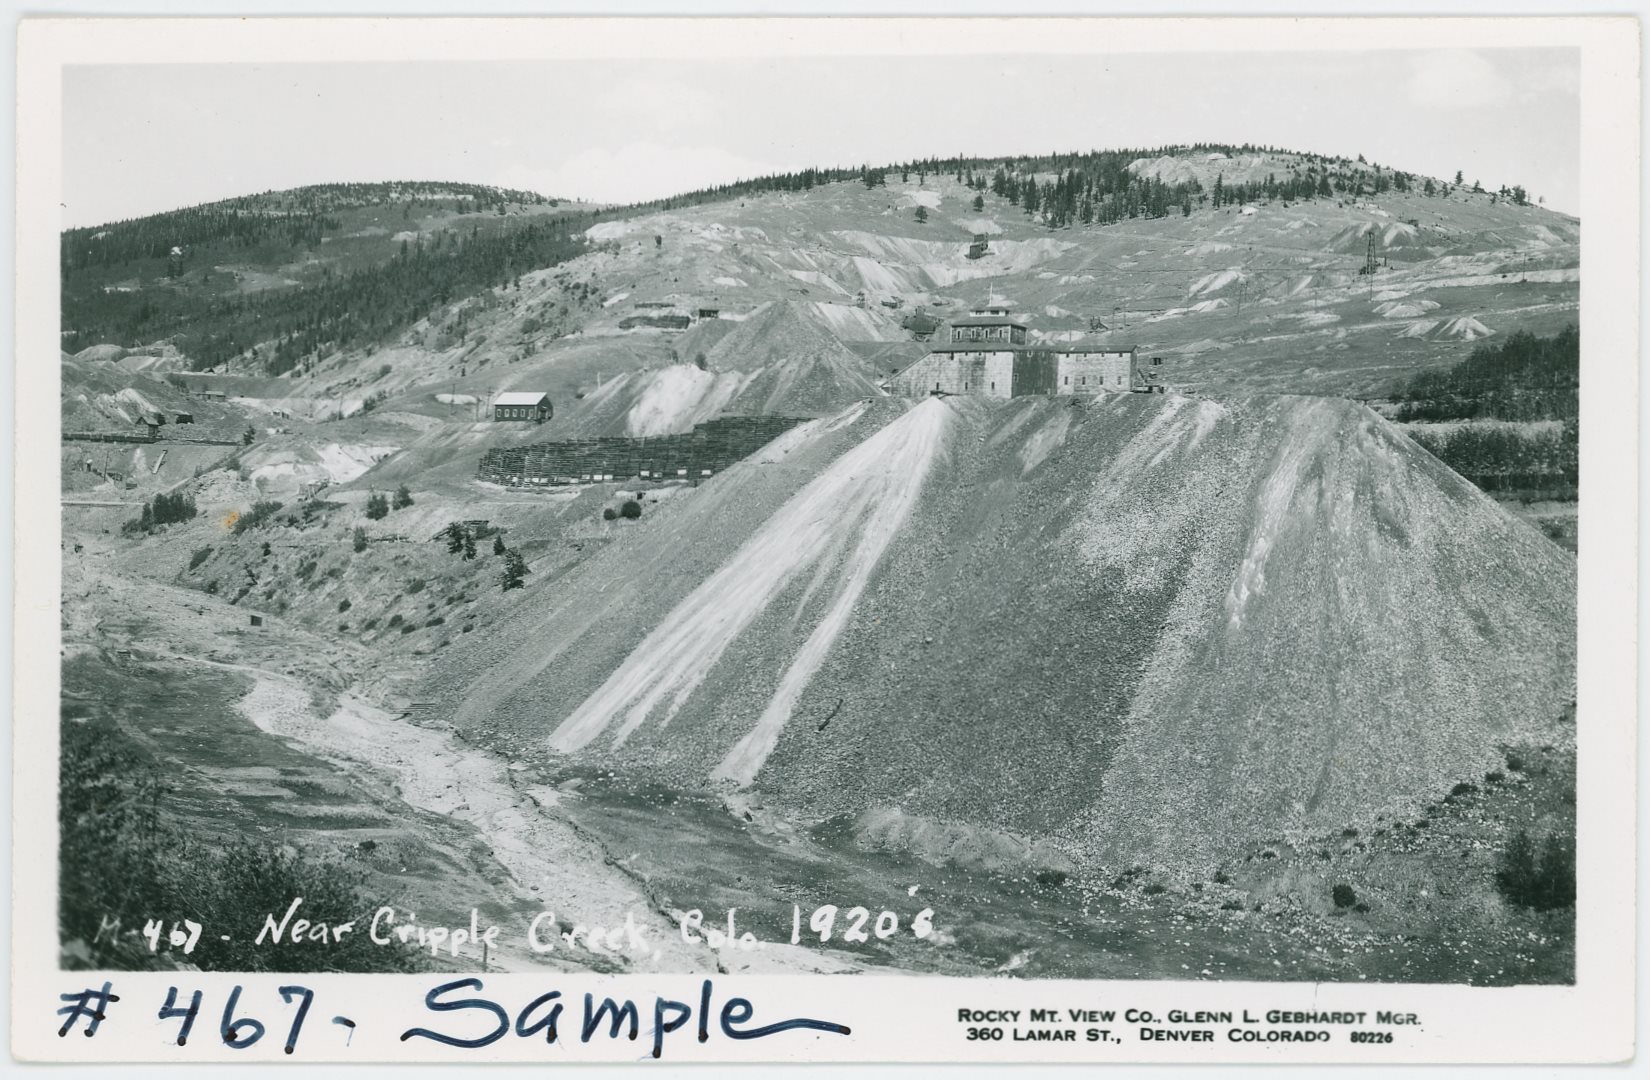 A view in Squaw Gulch towards the huge dump of the Mary McKinney Mine who's structure is popping up behind the dump, against the backdrop of Raven Hill with still a couple of mine ruins standing here and there. Image is marked to be from the 1920's, and in lower left it is still visible some flat parts, like terraces, from structures in the former town of Anaconda.